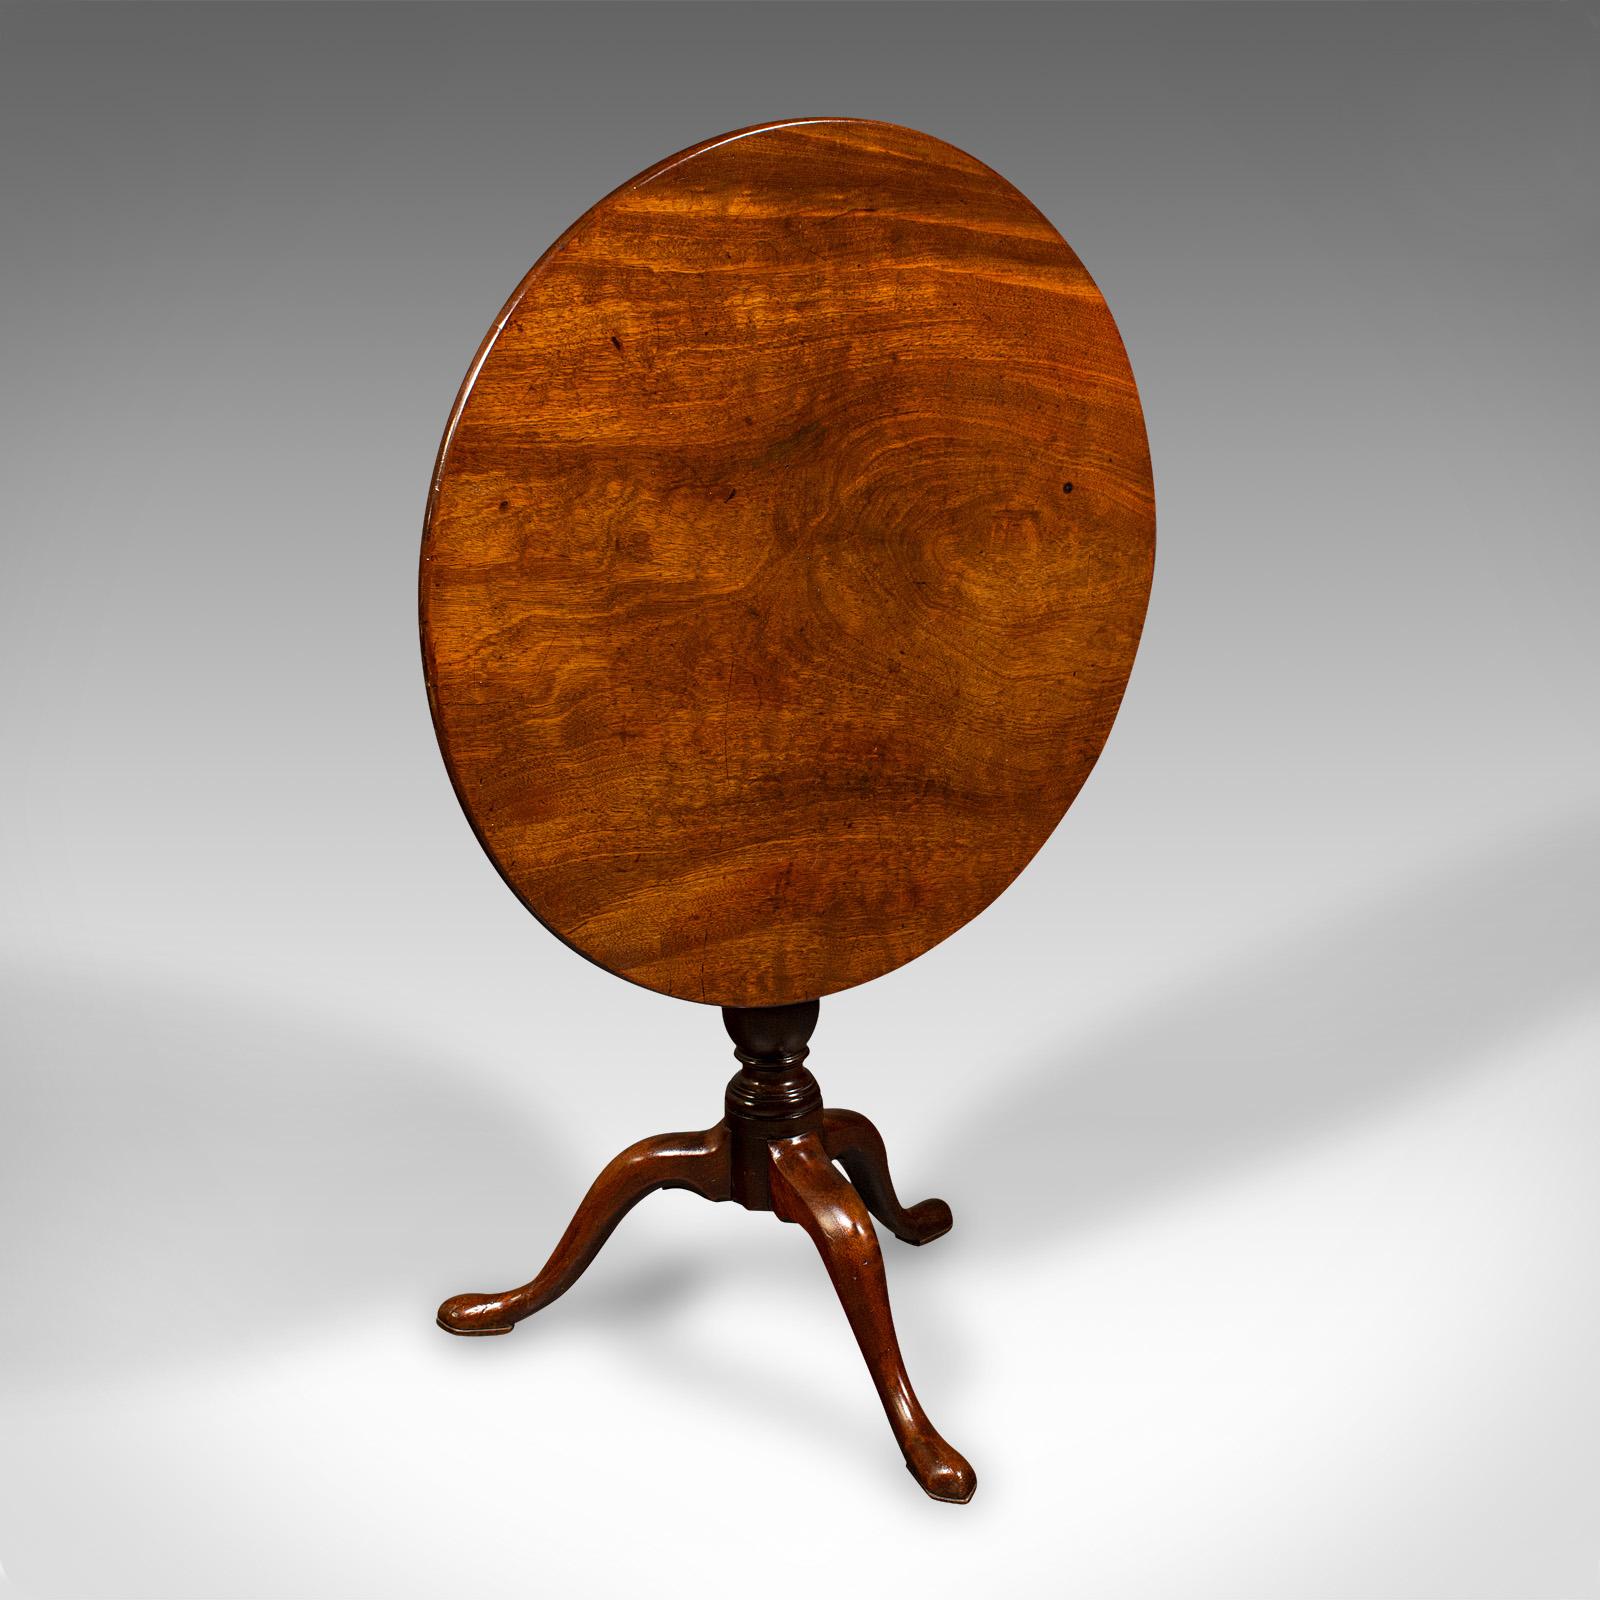 
This is an antique tilt-top table. An English, mahogany occasional table with birdcage mount, dating to the Georgian period, circa 1750.

Beautifully presented mid-Georgian example with fine figuring
Displays a desirable aged patina and in good